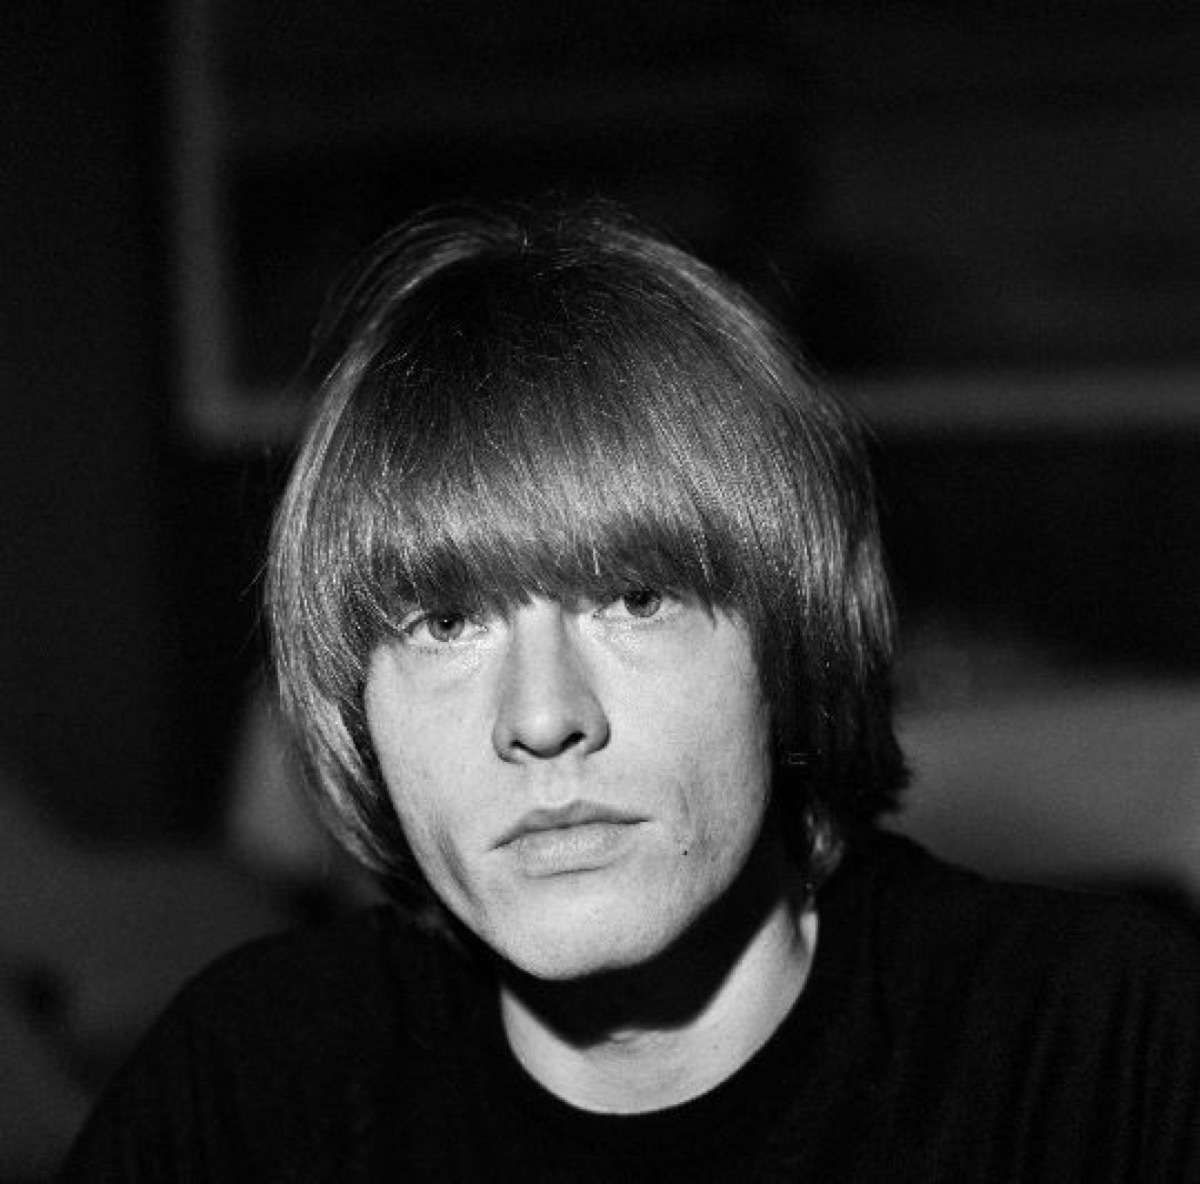 Photograph of Brian Jones of The Rolling Stones during the band's visit to Finland.